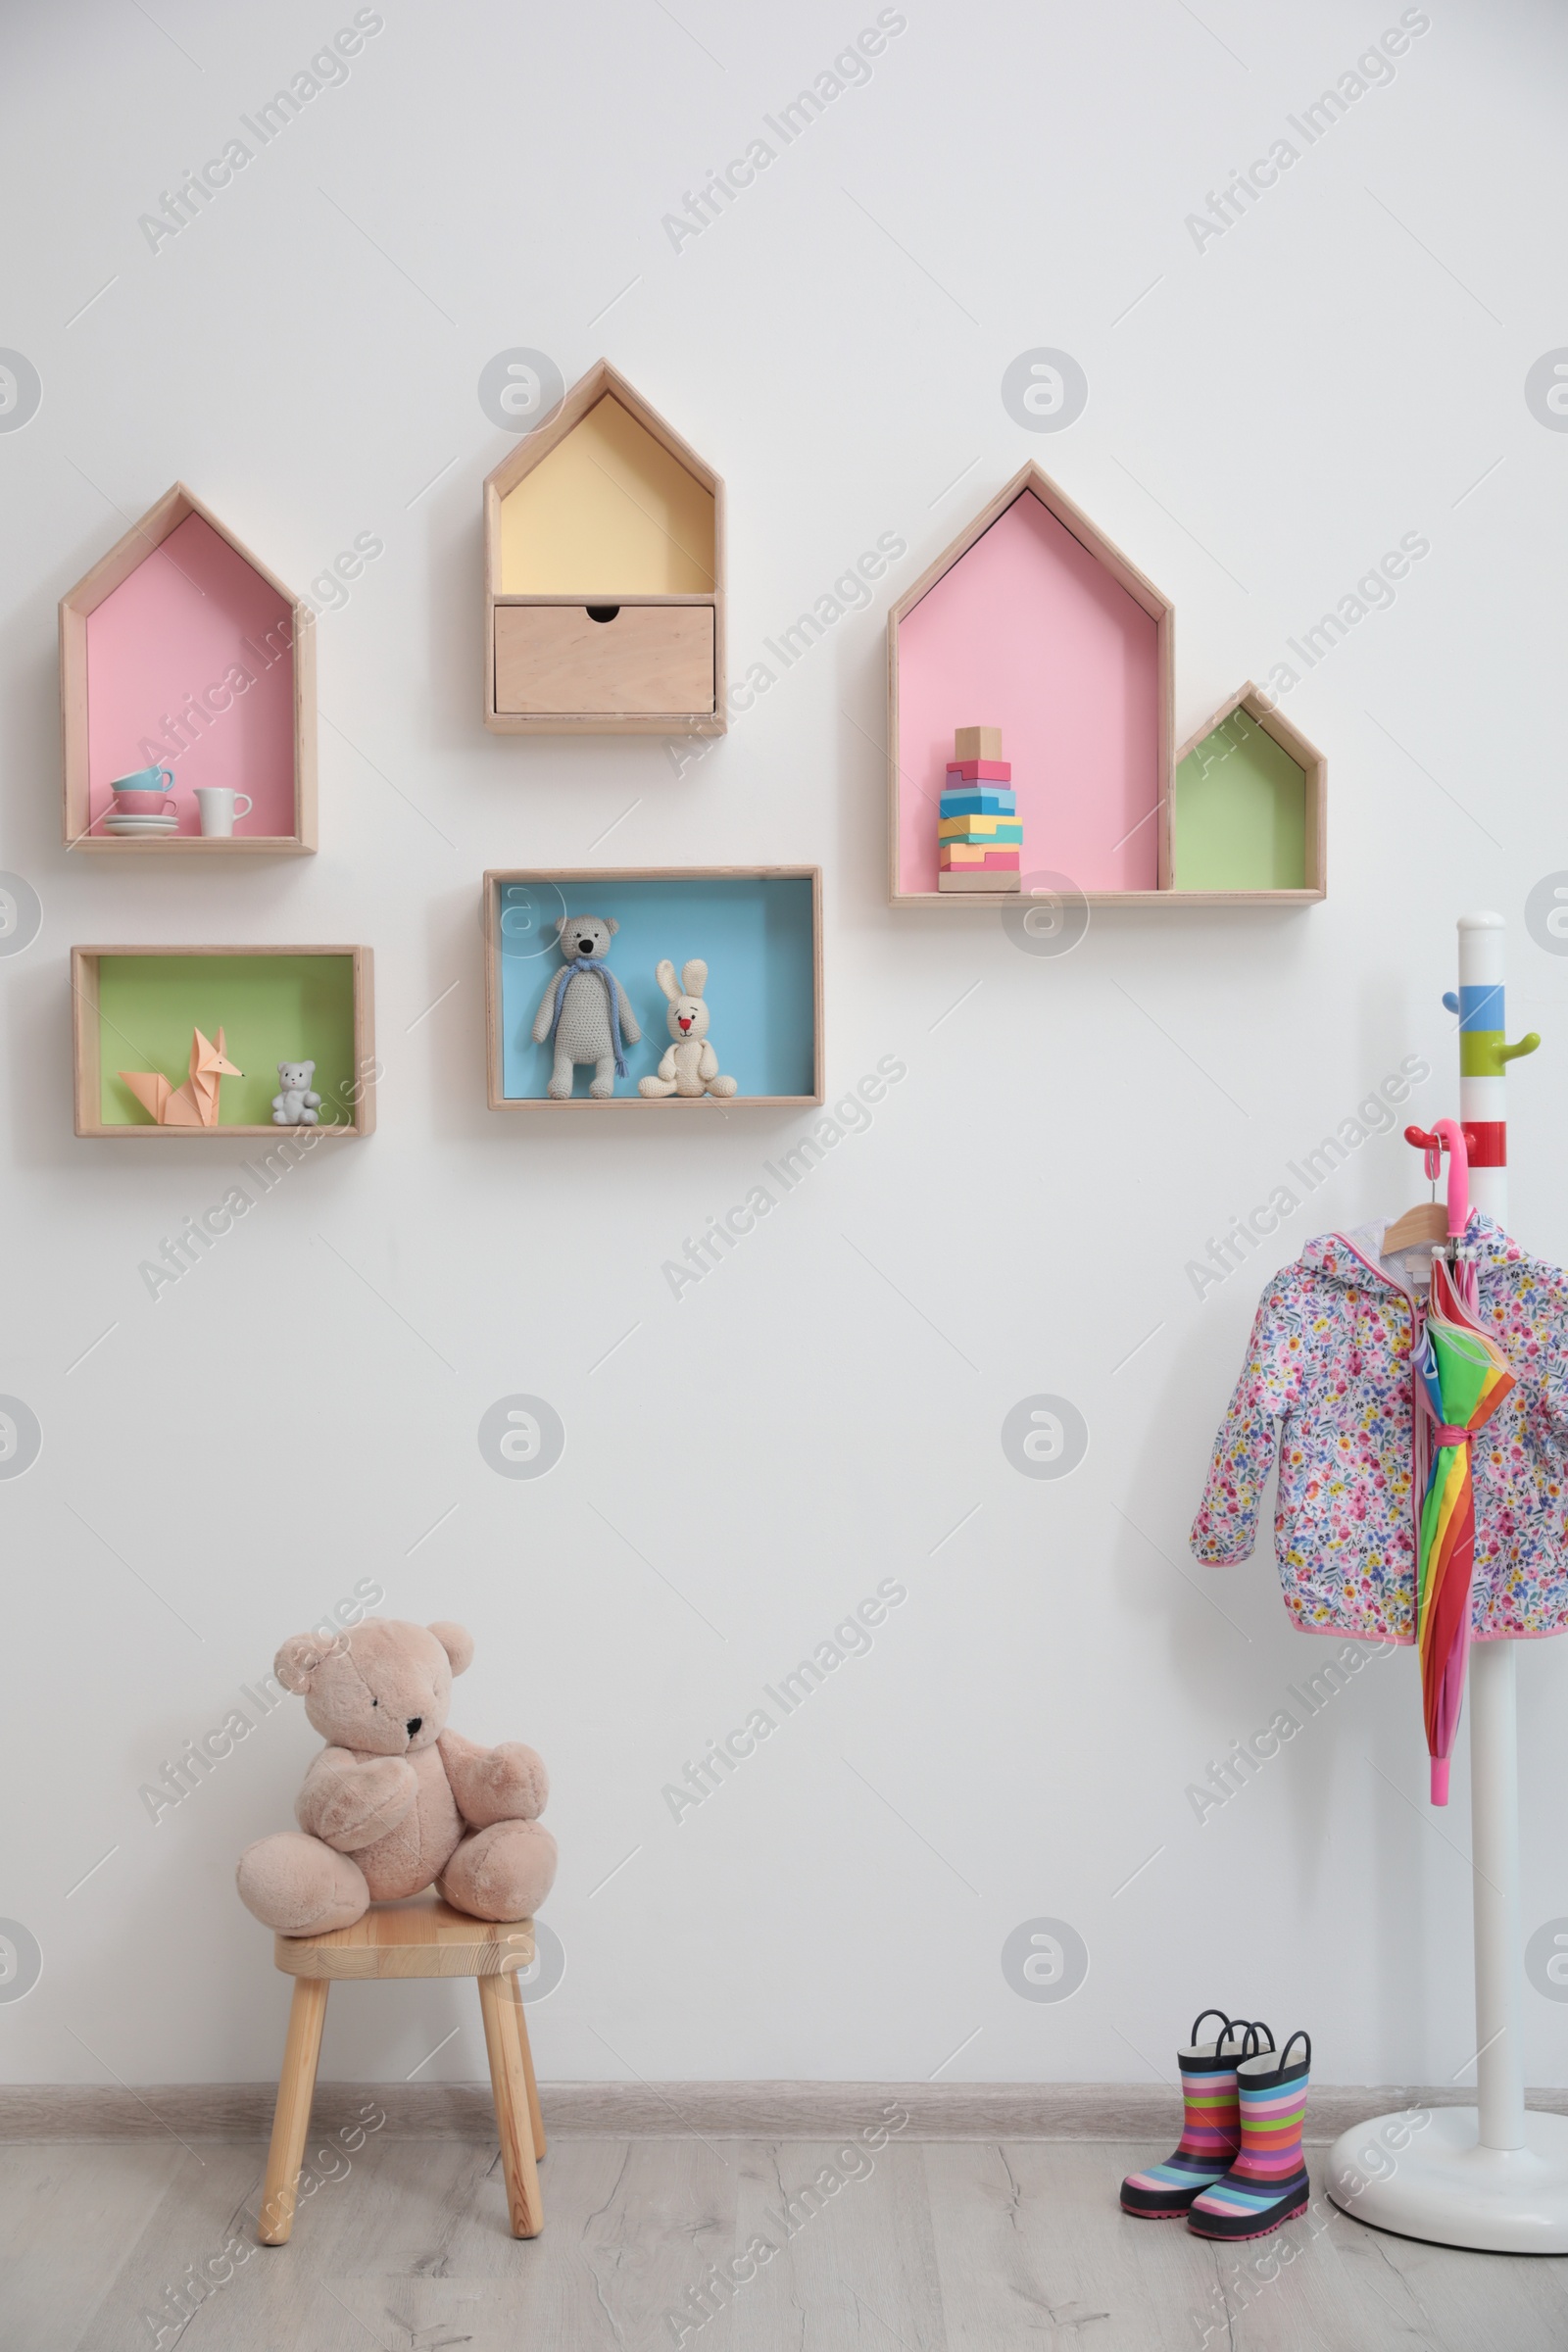 Photo of Stylish baby room interior design with house shaped shelves and coat rack